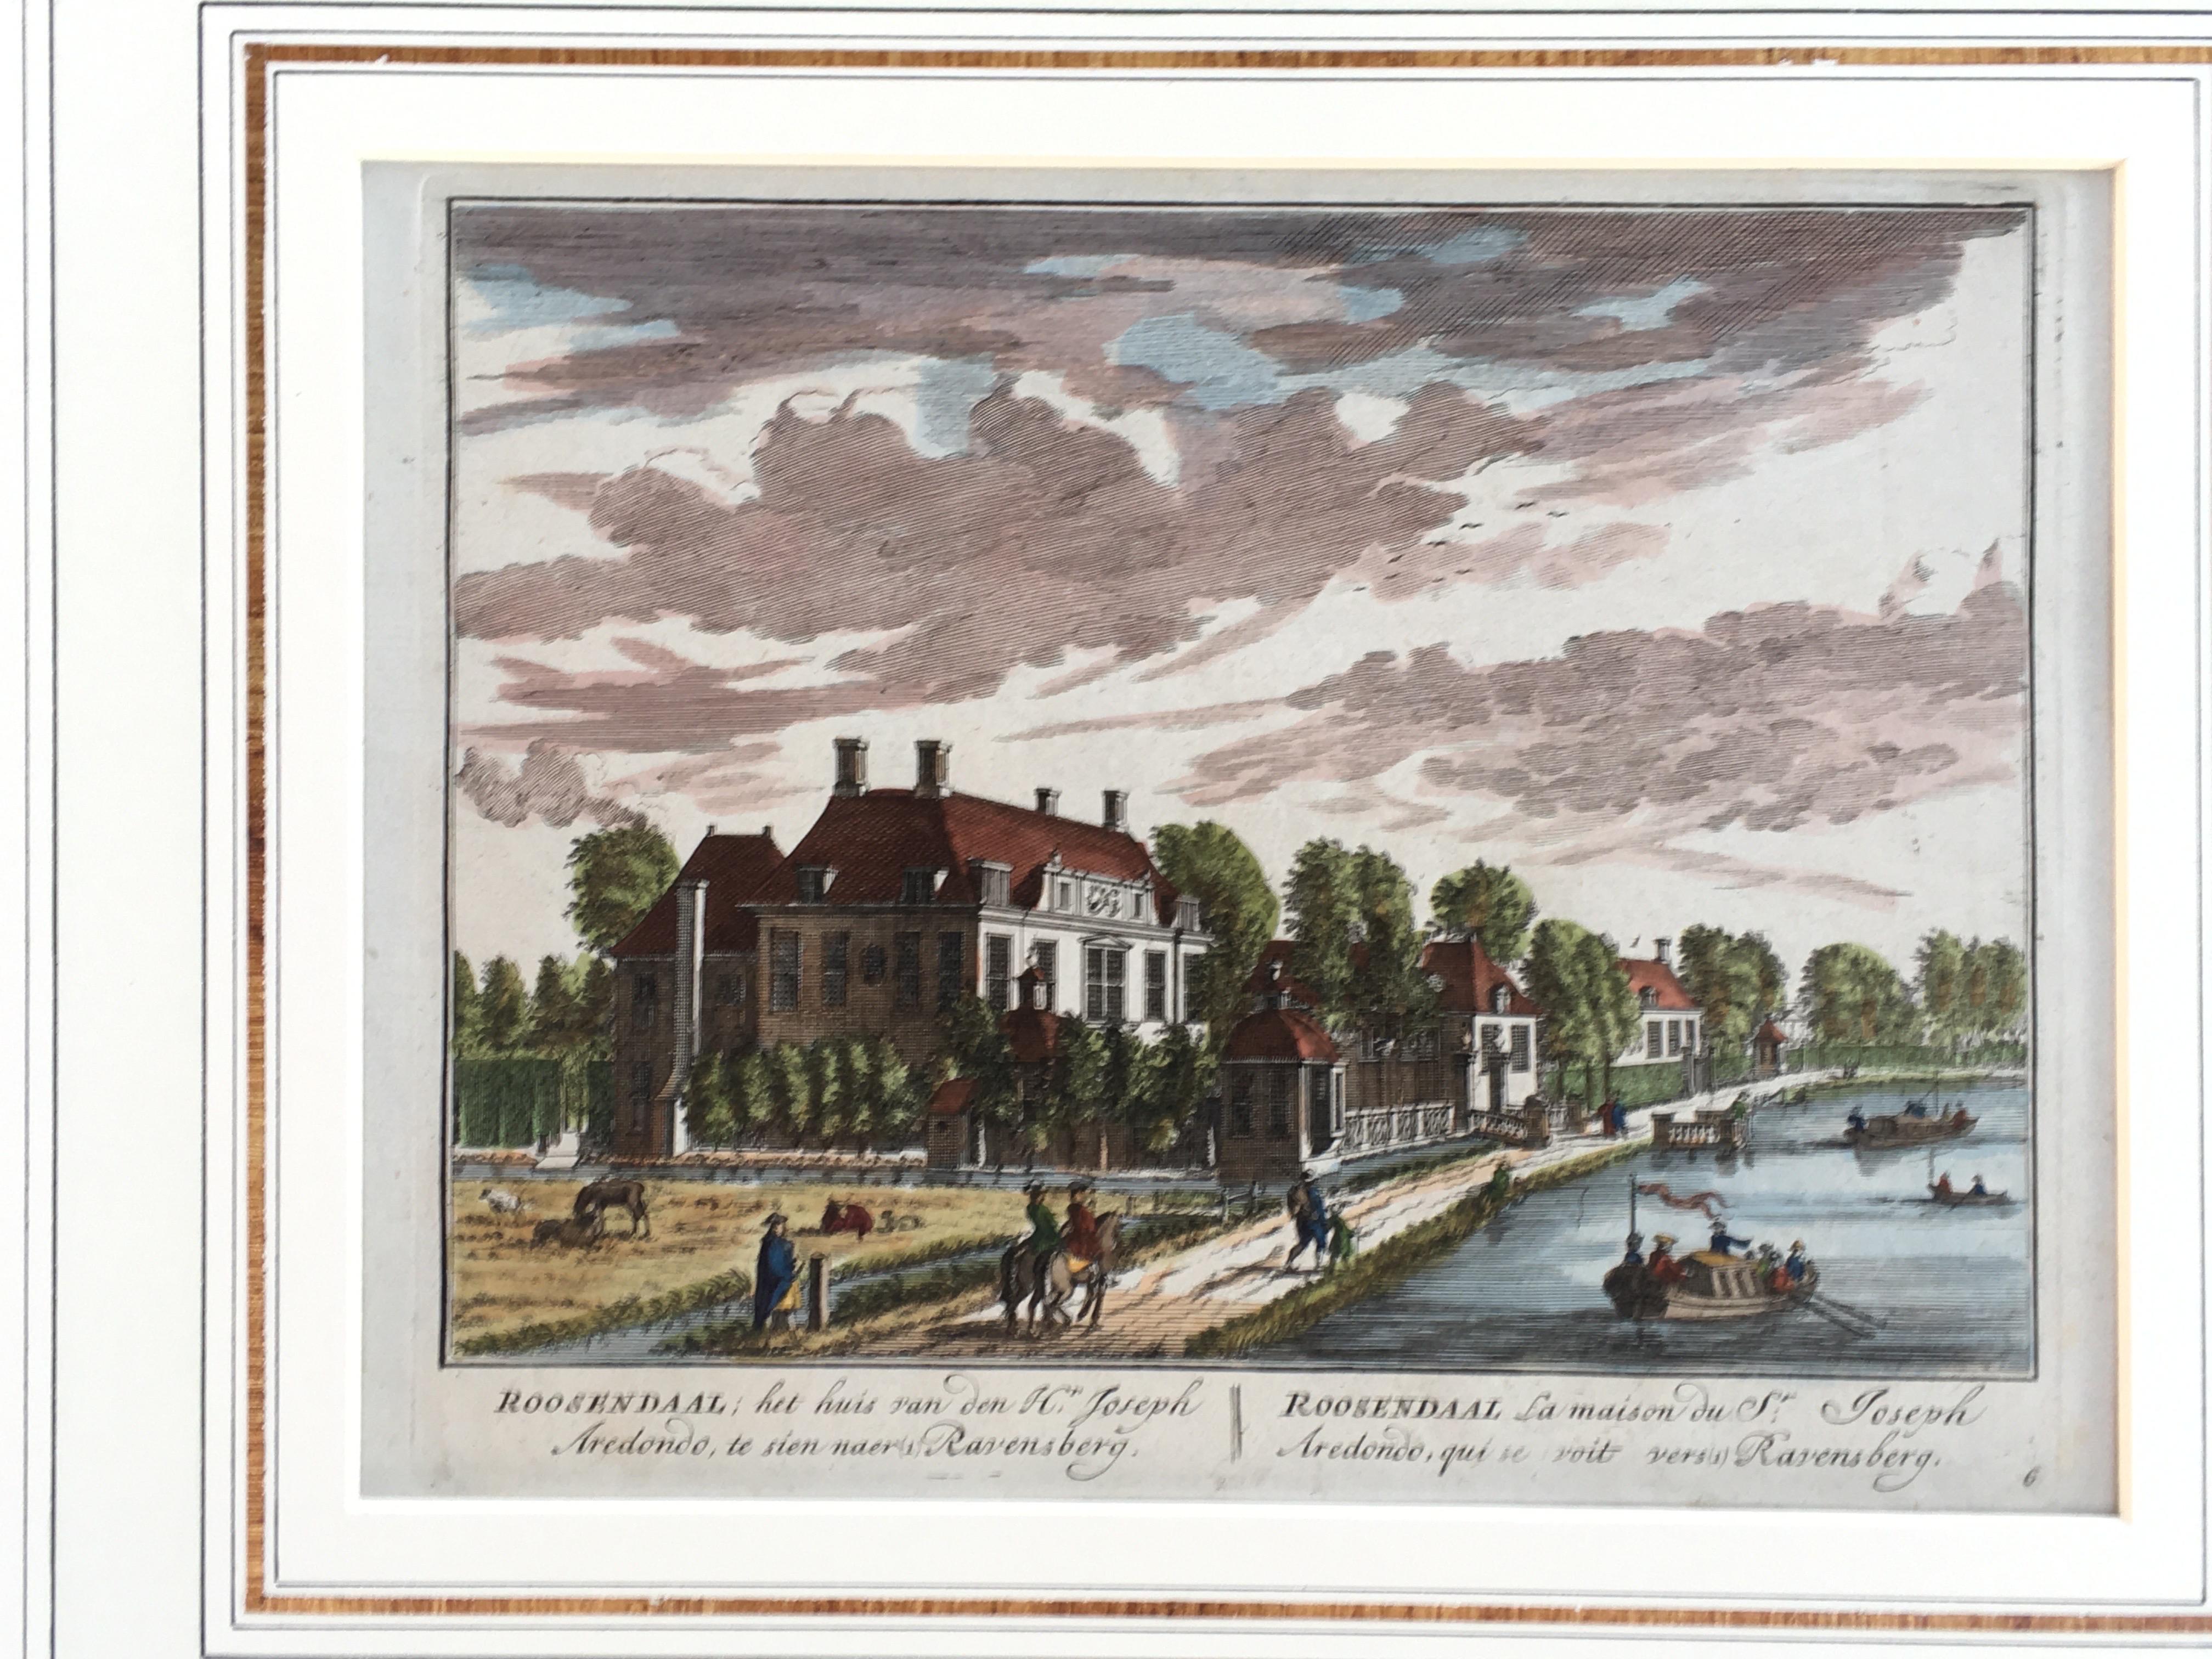 And engraving printed in Holland in 1710 by Lambert Visseher from a prominent Palm Springs, CA estate.. This charming image is of a neighborhood in Holland, on the edge of a river (or lake). This image was hand colored from the original copperplate